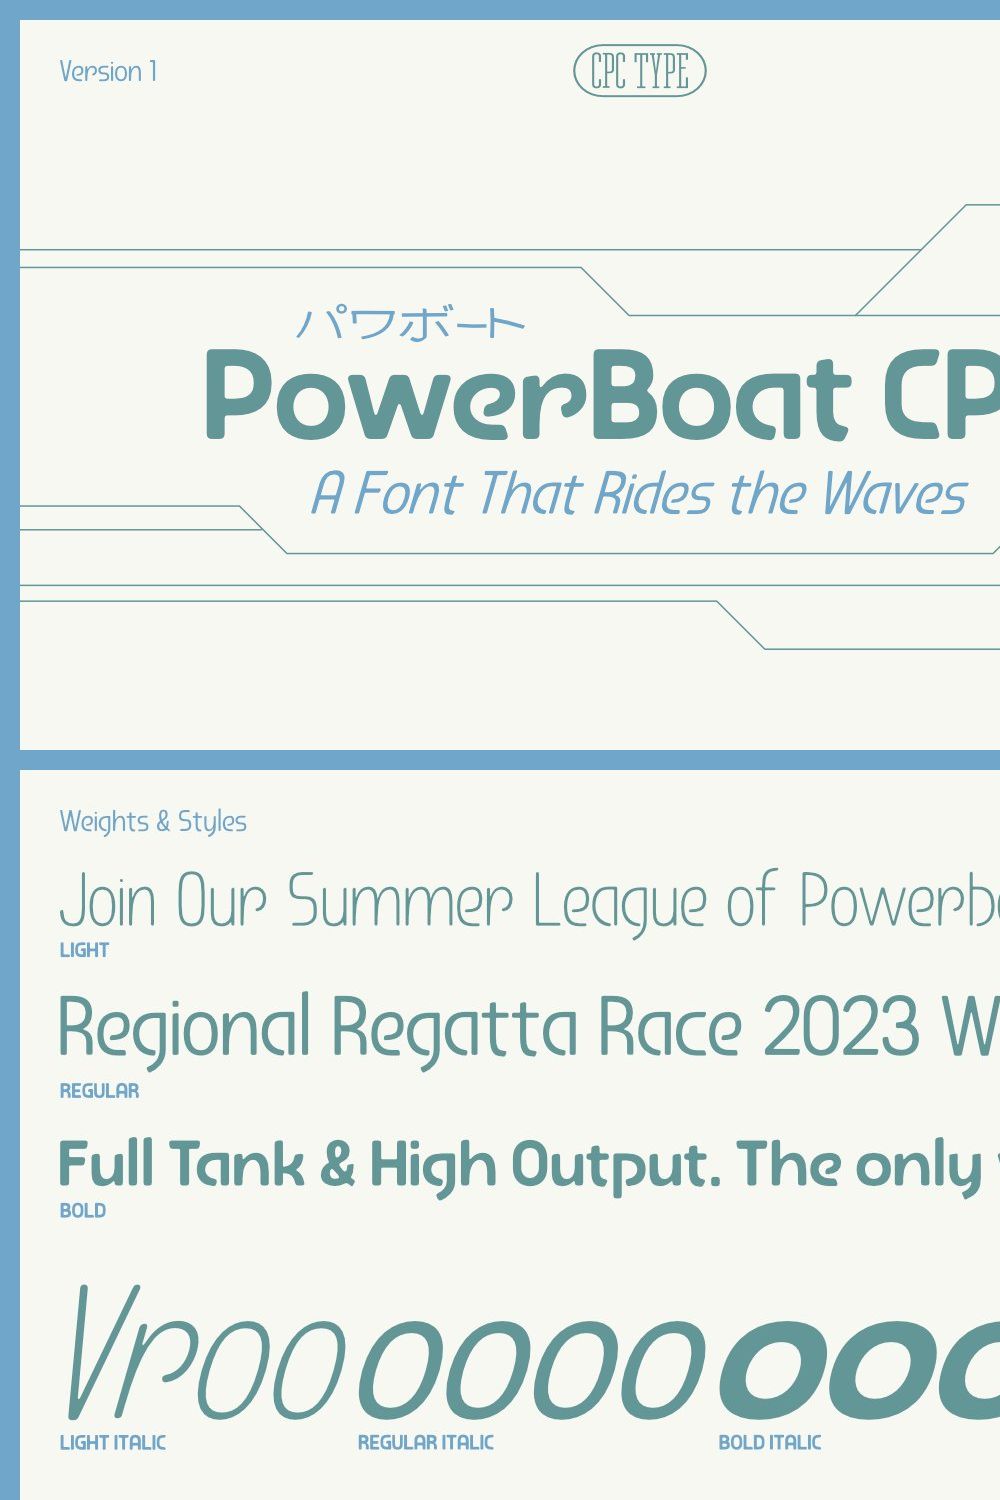 PowerBoat CPC pinterest preview image.